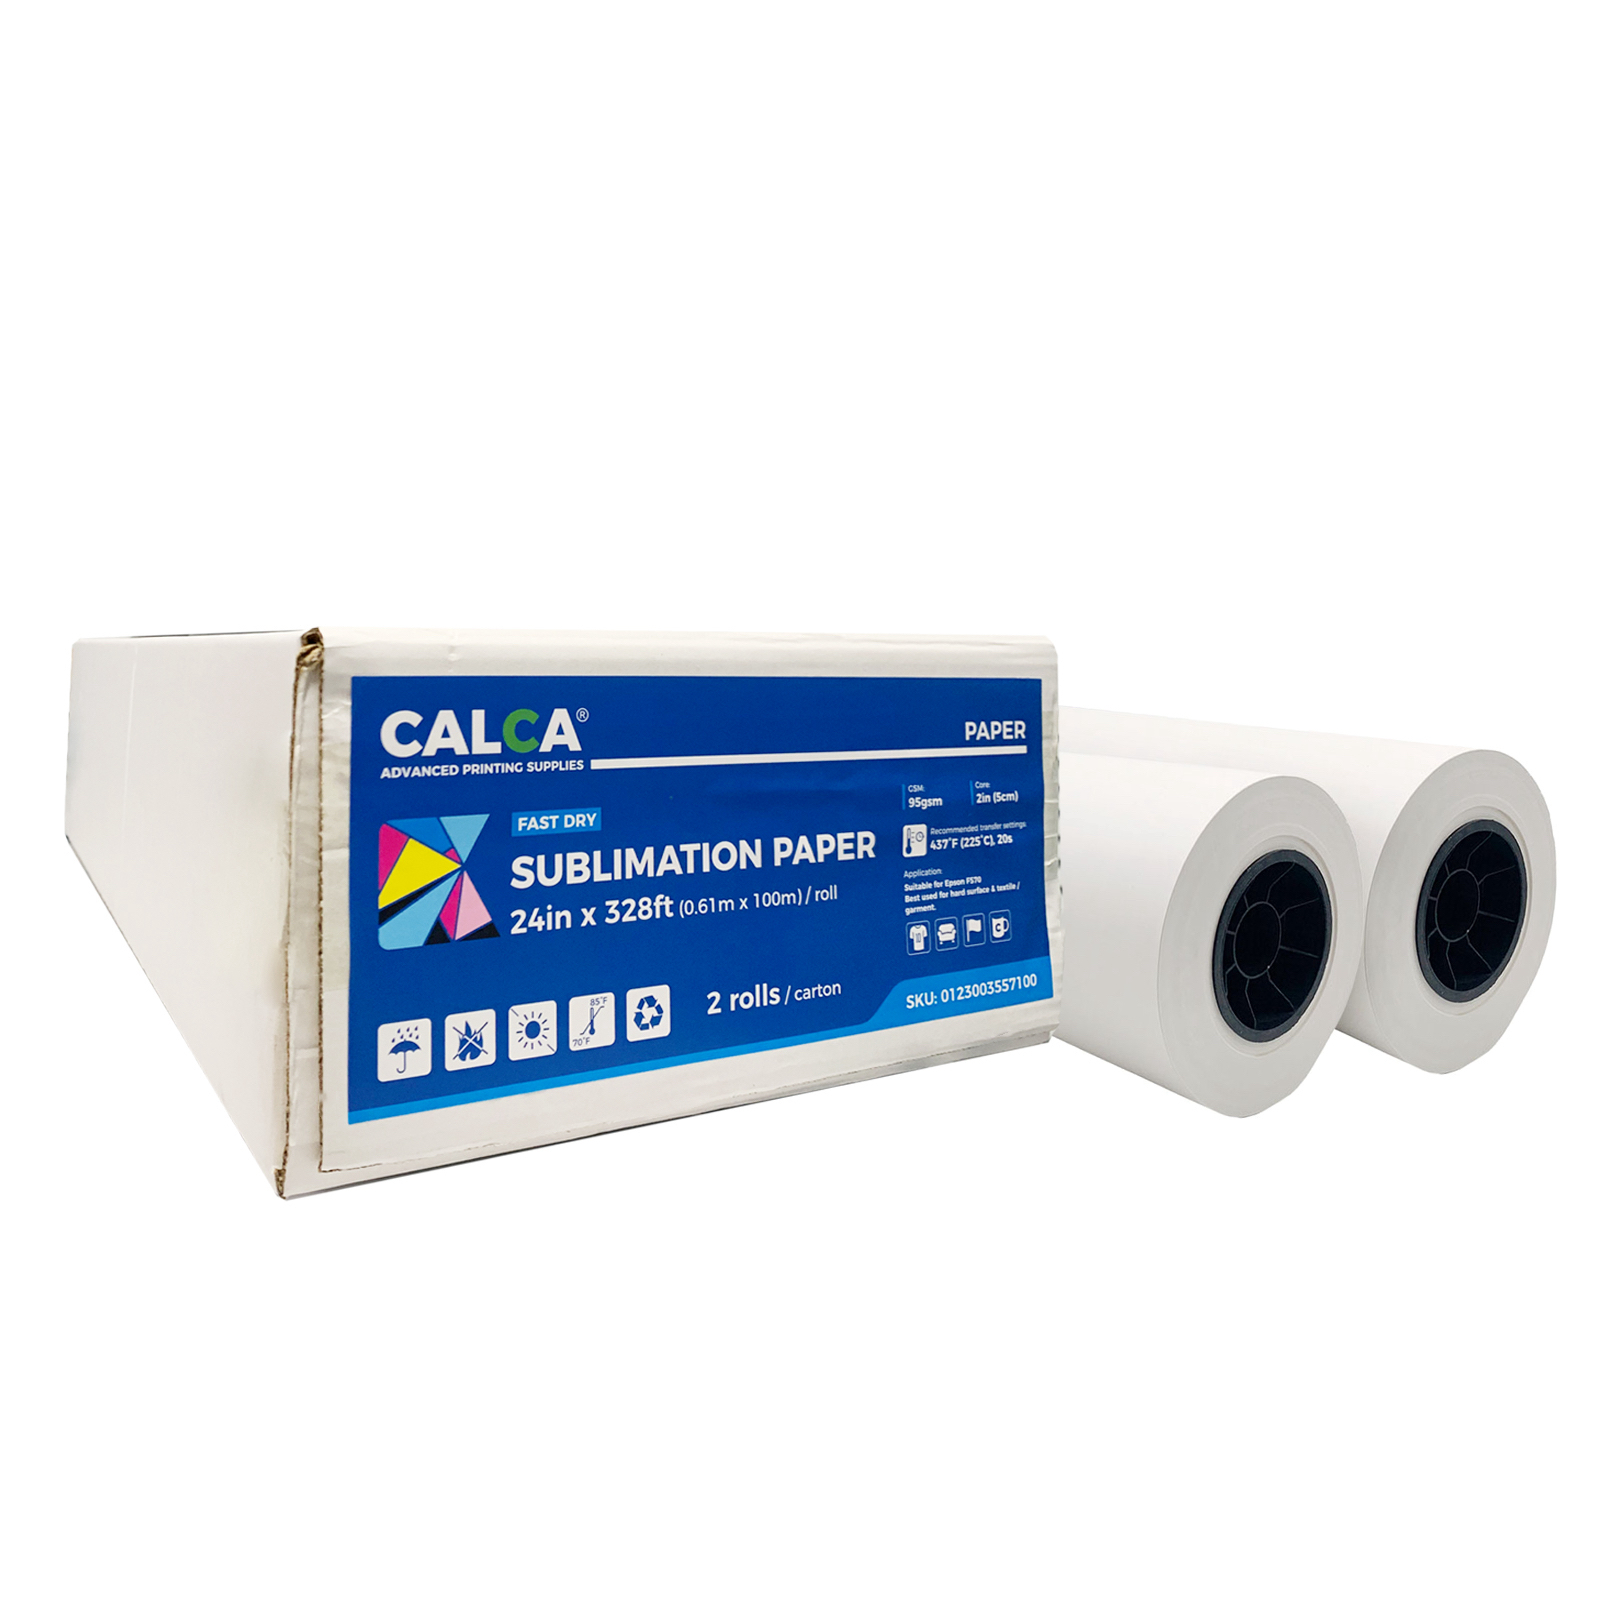 CALCA 2 Rolls 95gsm 24in x 328ft Fast Dry Dye Sublimation Paper for SureColor F570 Dye-Sublimation Printer, 2" Core